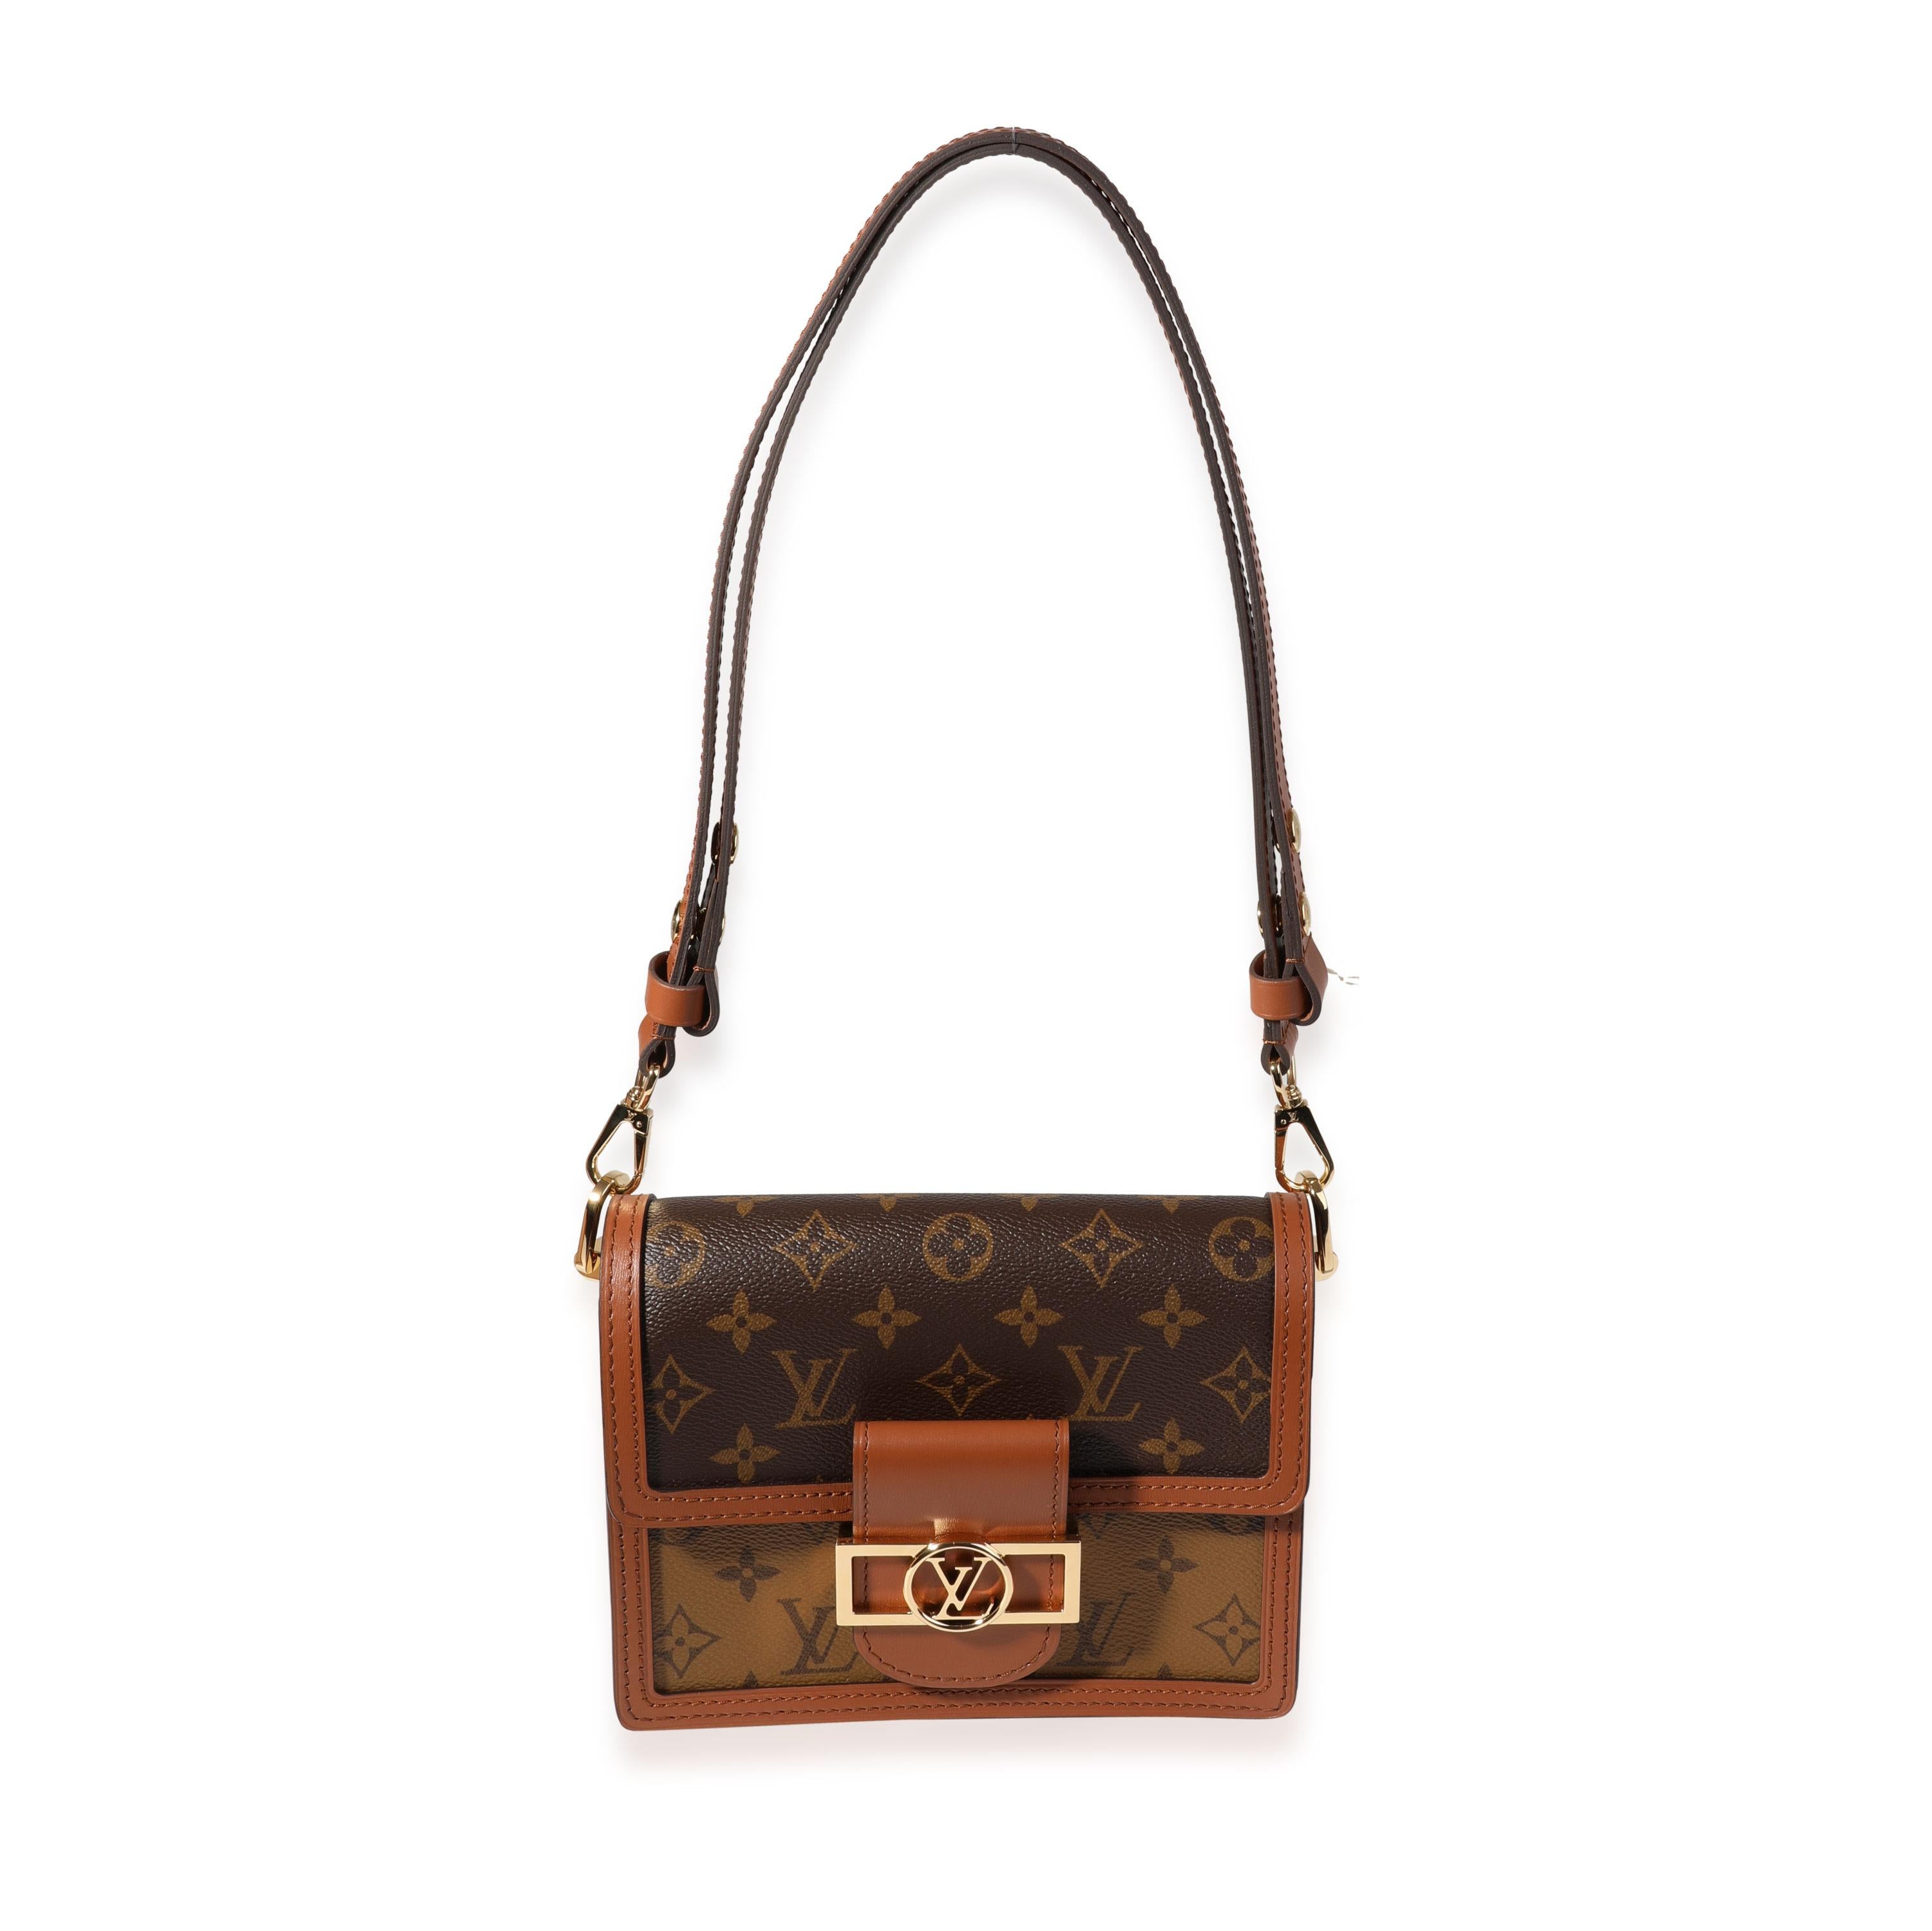 Listing Title: Louis Vuitton Monogram Reverse Canvas Mini Dauphine
SKU: 119988
MSRP: 3400.00
Condition: Pre-owned (3000)
Handbag Condition: Excellent
Condition Comments: Excellent Condition. Plastic on some hardware. Light discoloration to interior